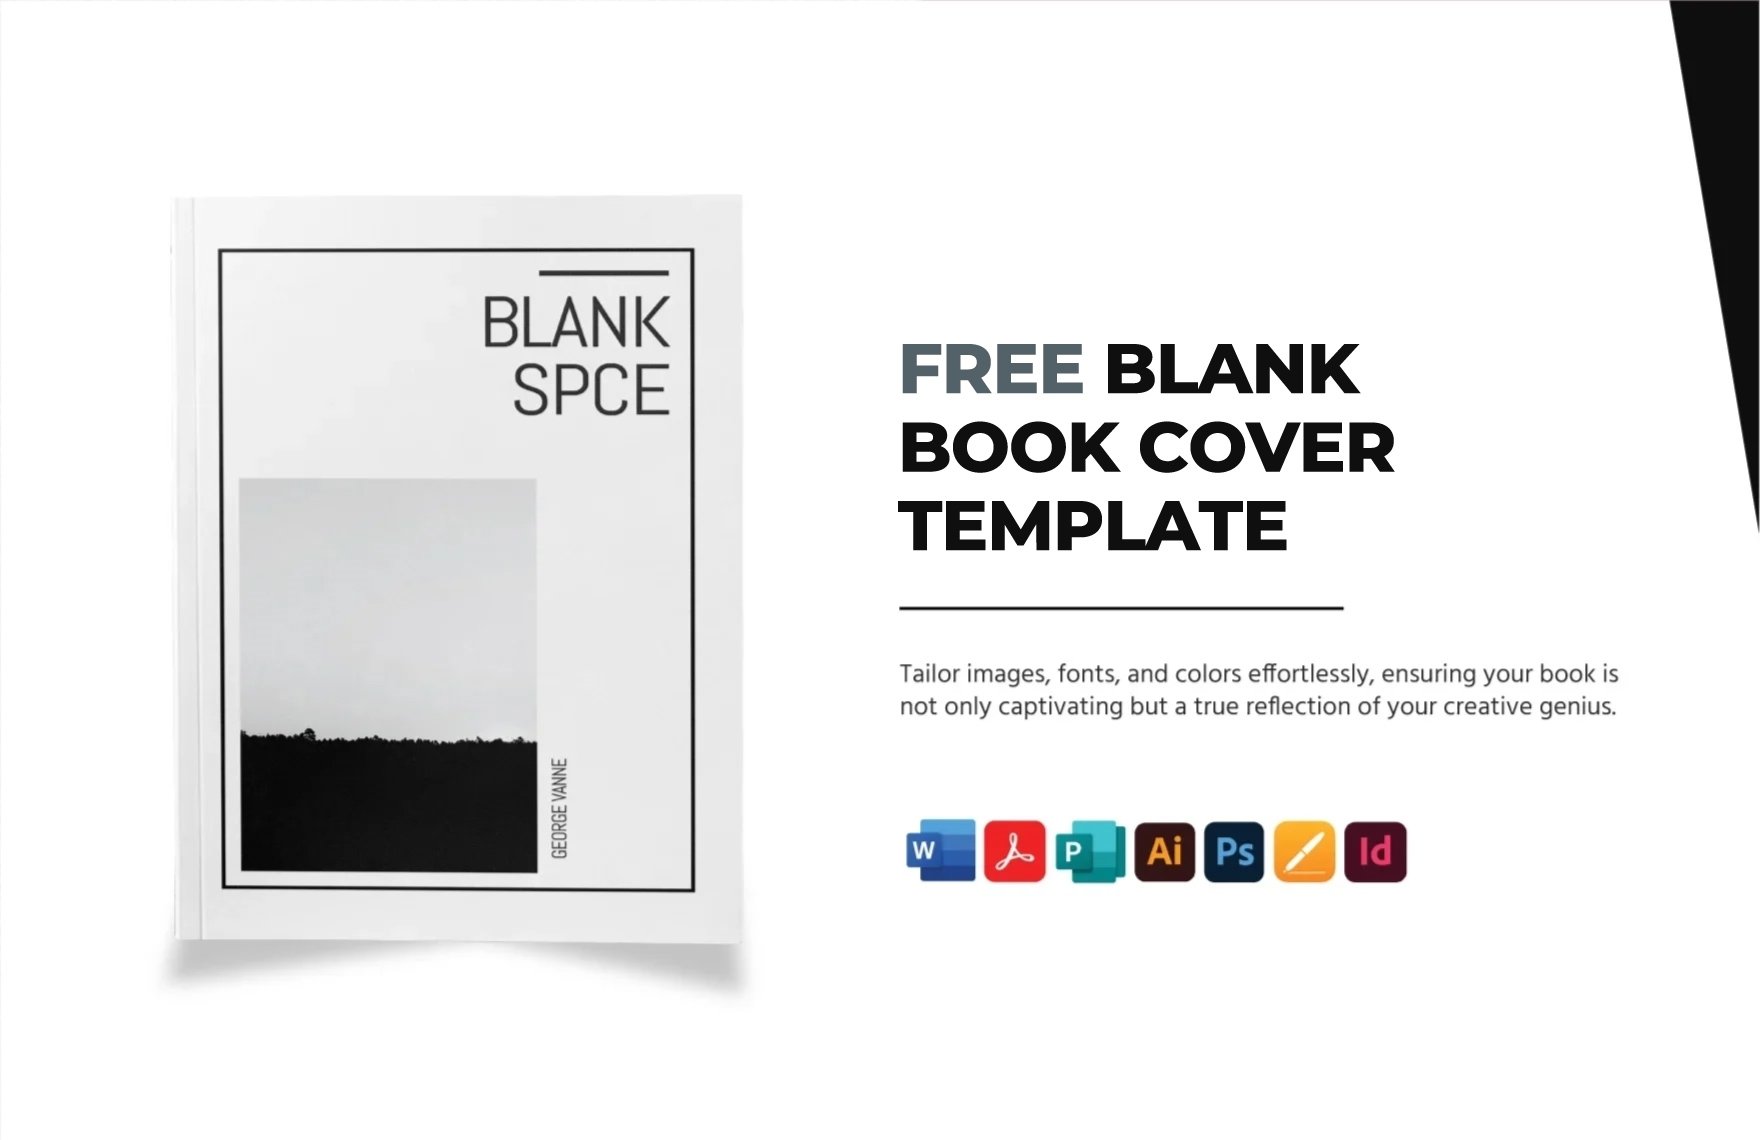 Free Blank Book Cover Template in Word, PDF, Illustrator, PSD, Apple Pages, Publisher, InDesign